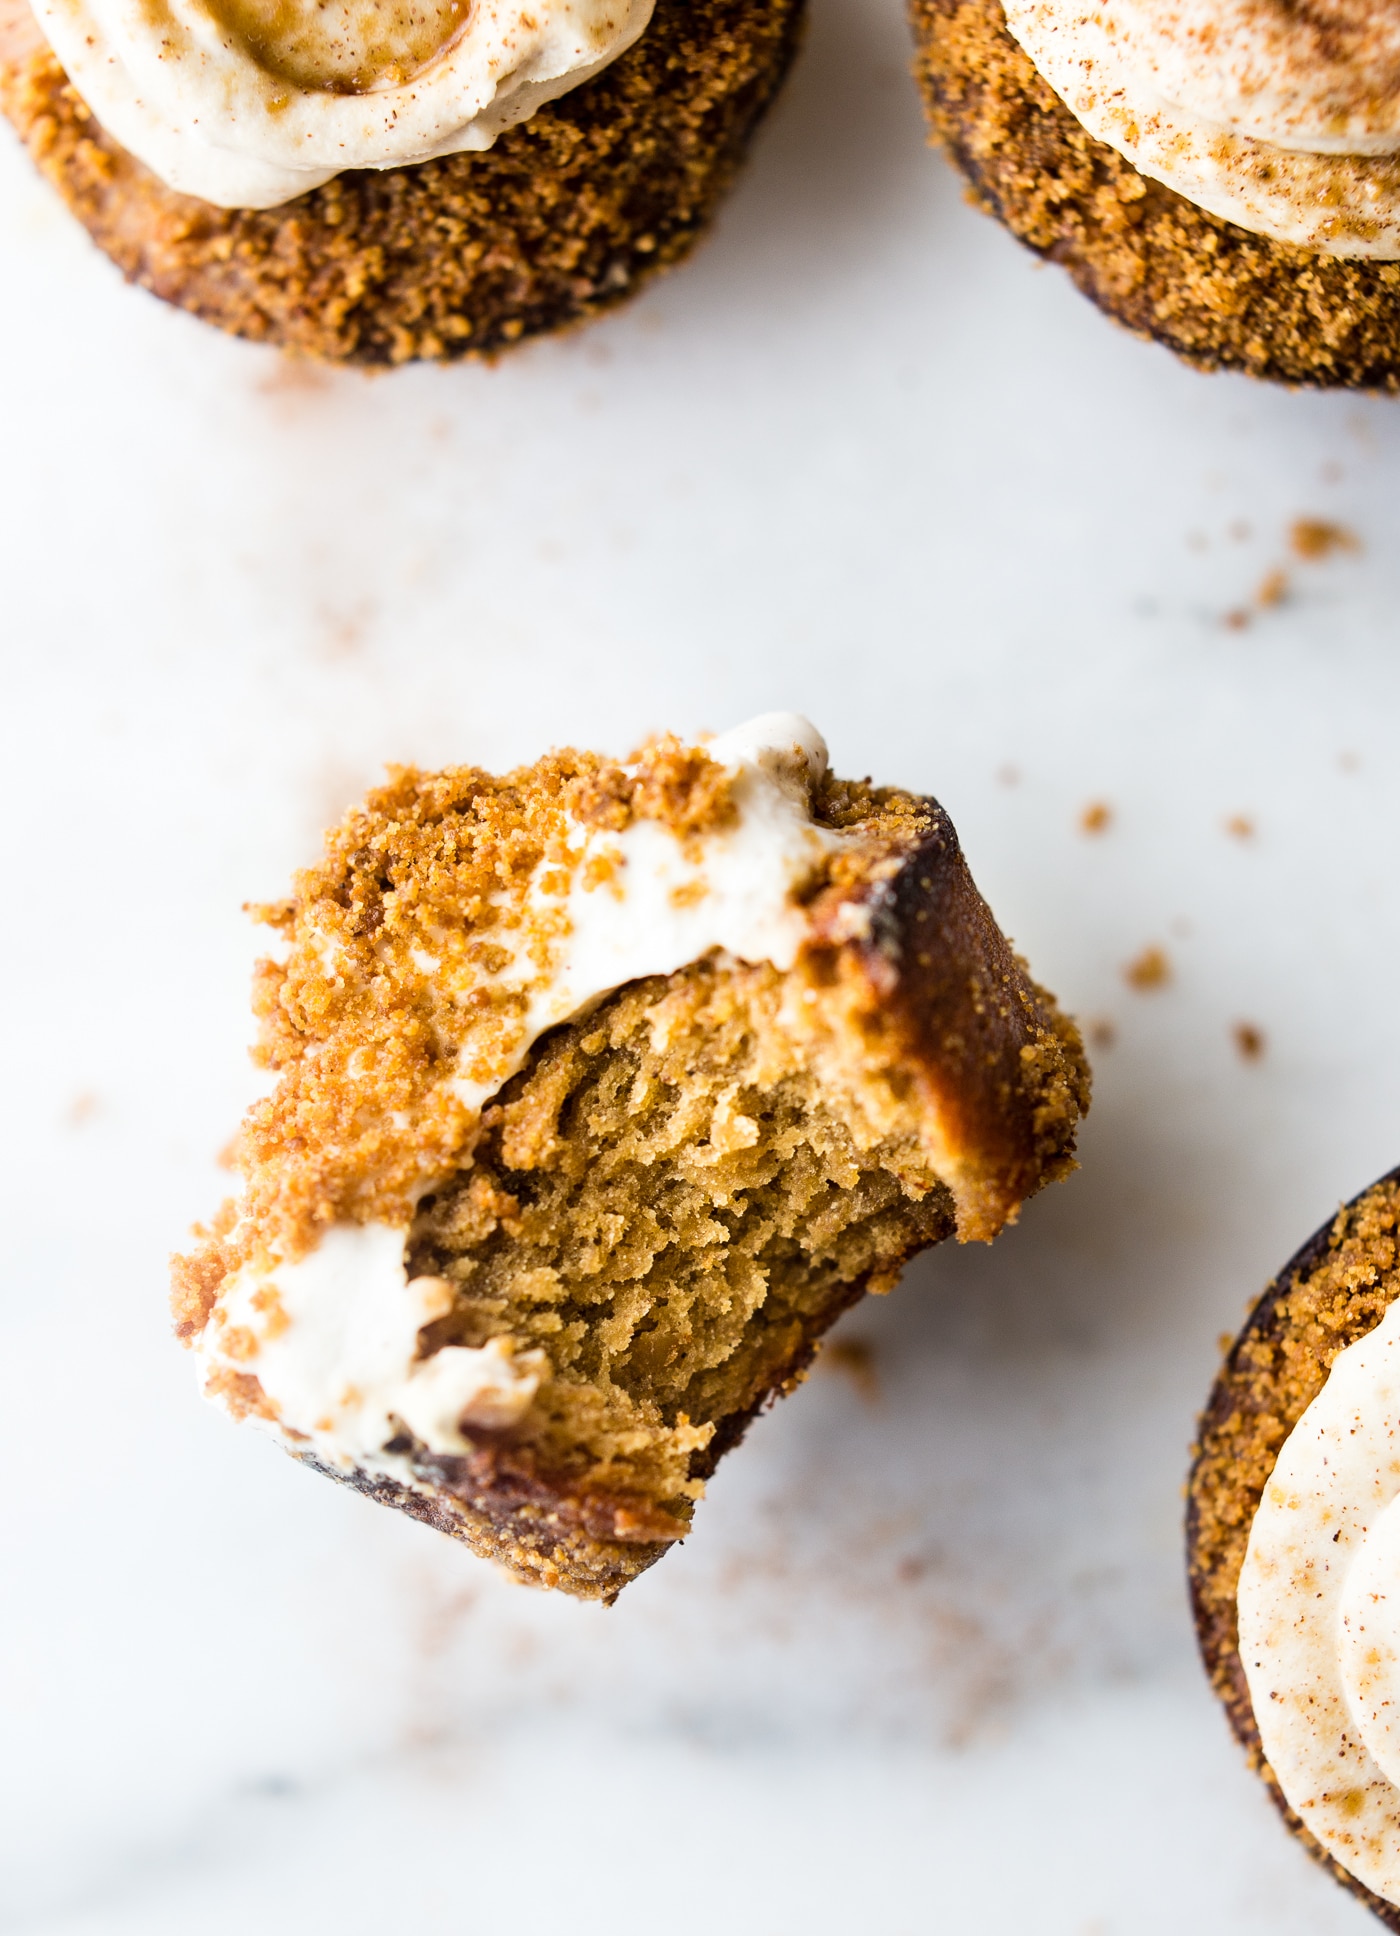 Flourless Peanut Butter Churro Cupcakes with Coconut Frosting! A gluten free cupcakes recipe that's easy to make, sweet, buttery, flakey, & paleo friendly.